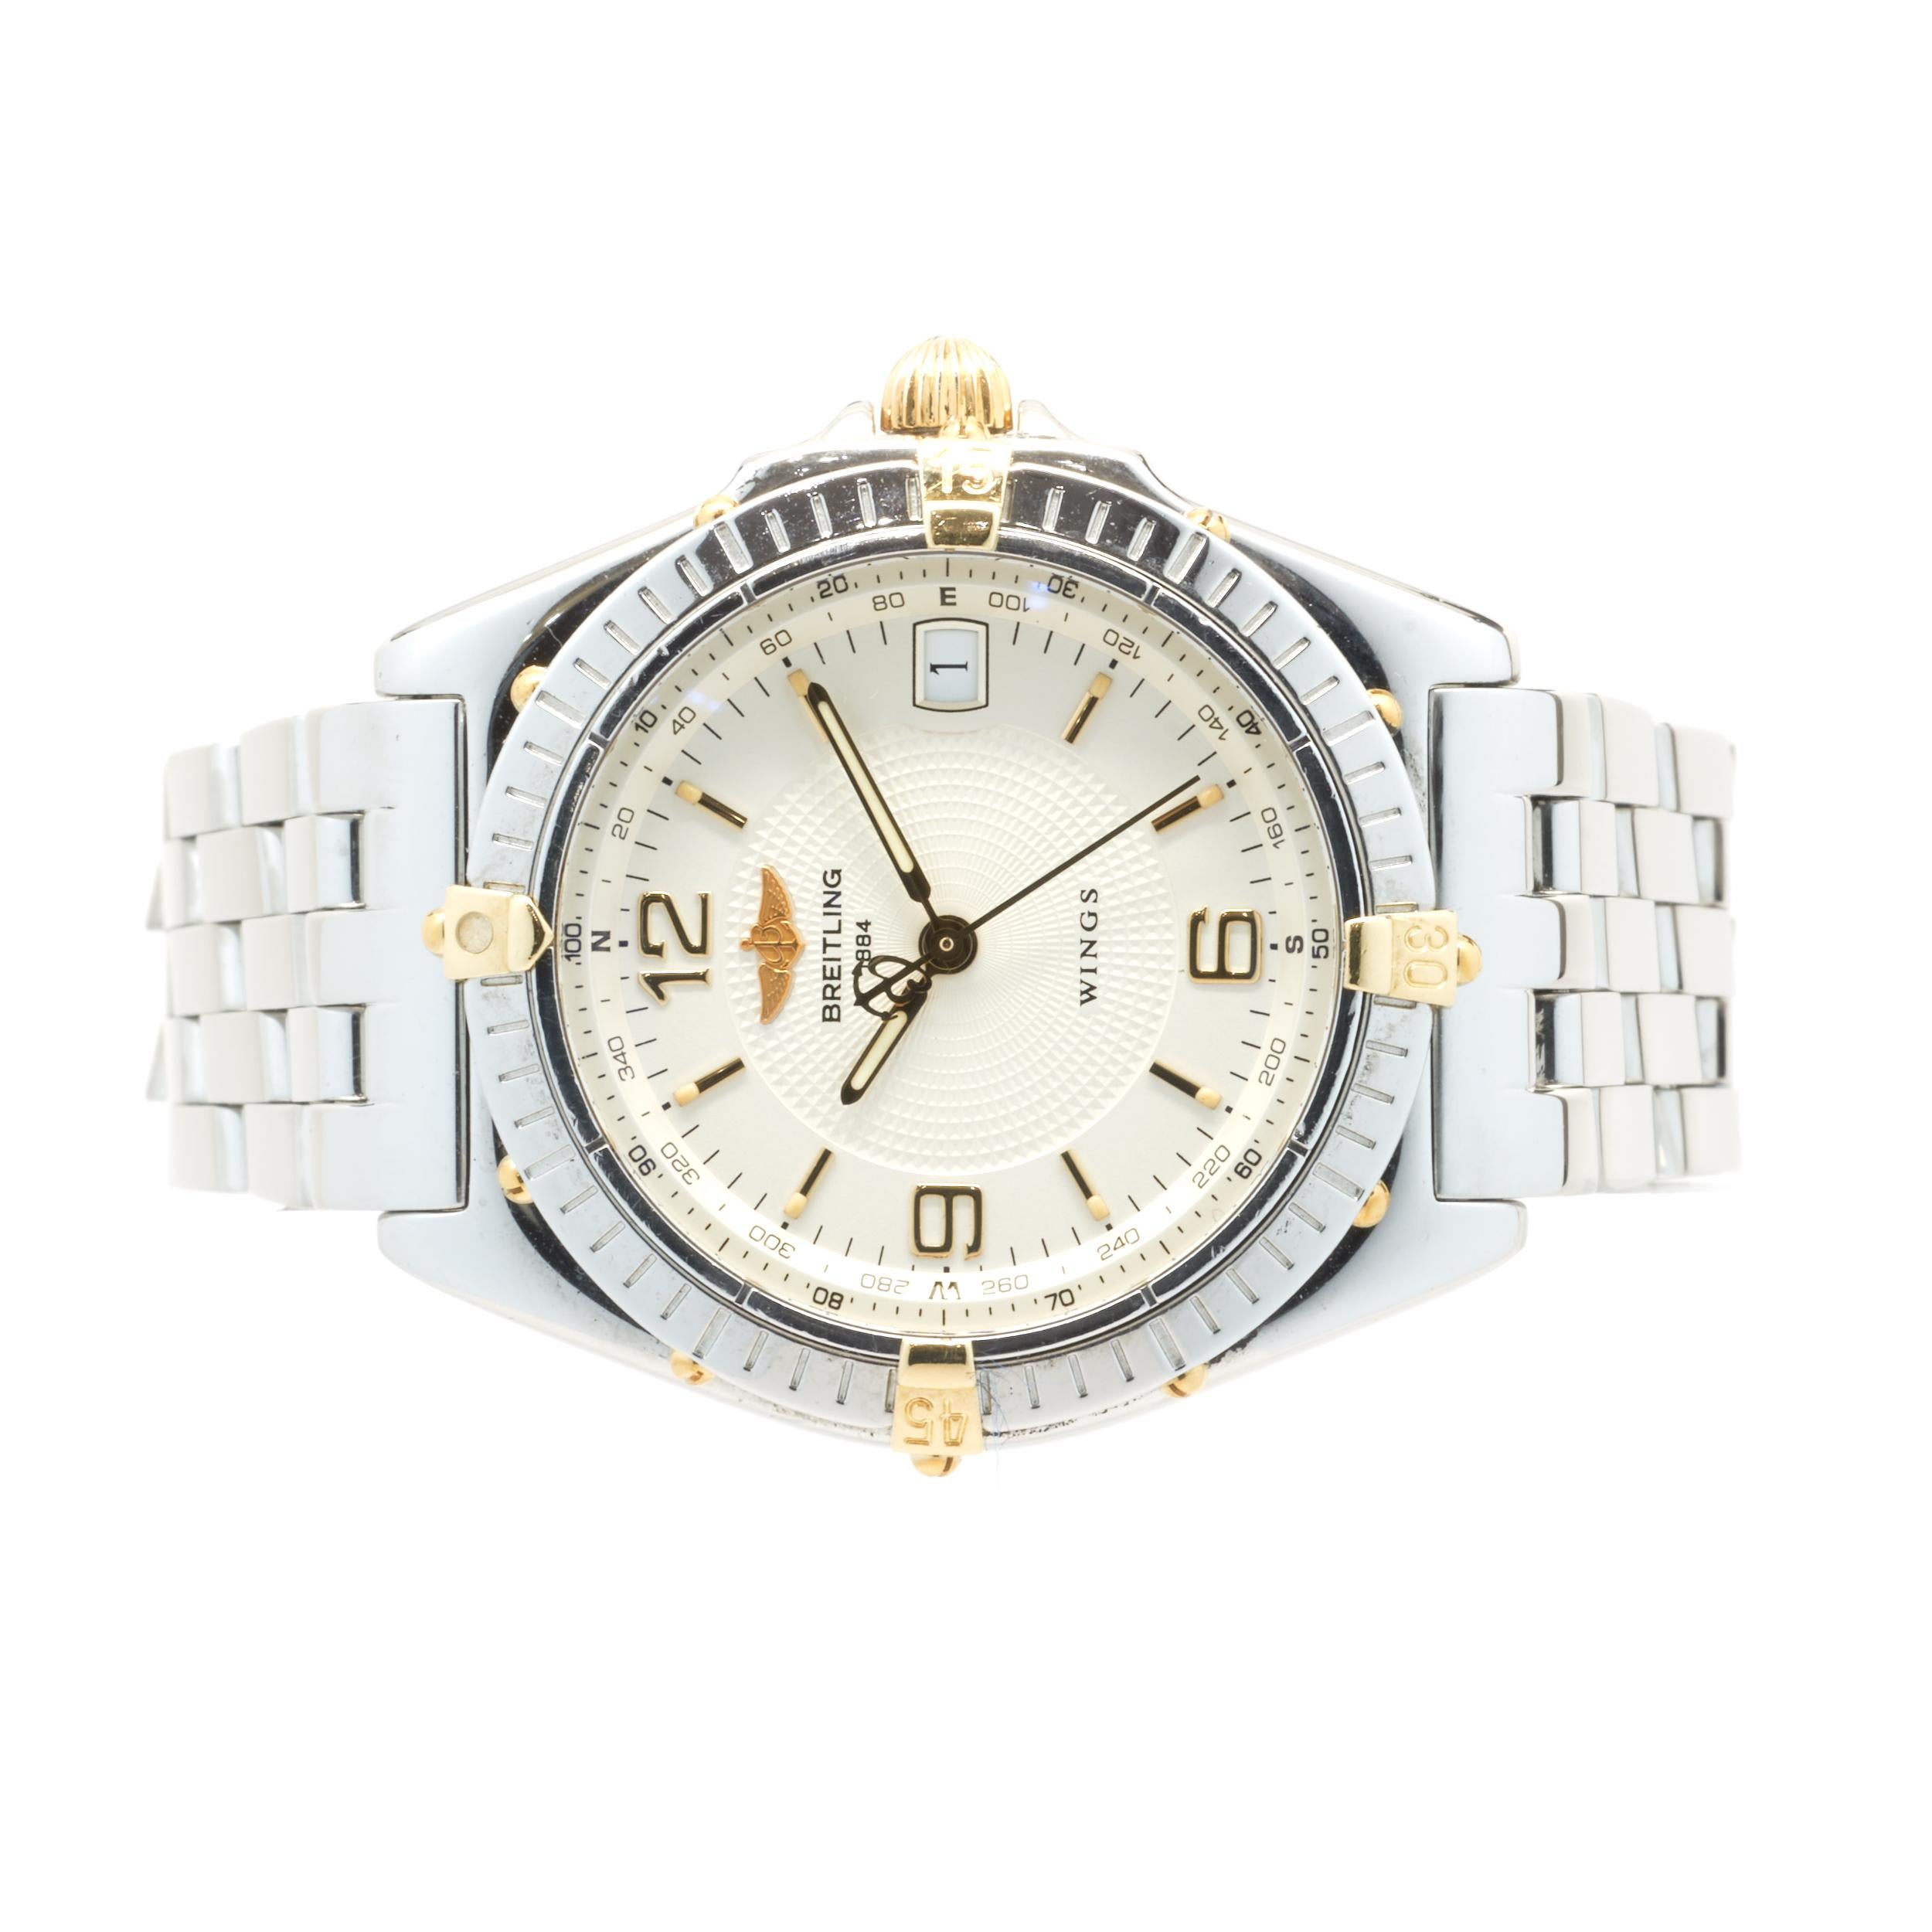 Movement: automatic
Function: hours, minutes, seconds, date
Case: round 37.6mm stainless steel case with rotating bezel, sapphire protective crystal, Breitling engraved case-back, screw-down crown and pushers, water resistant to 100 meters
Band: